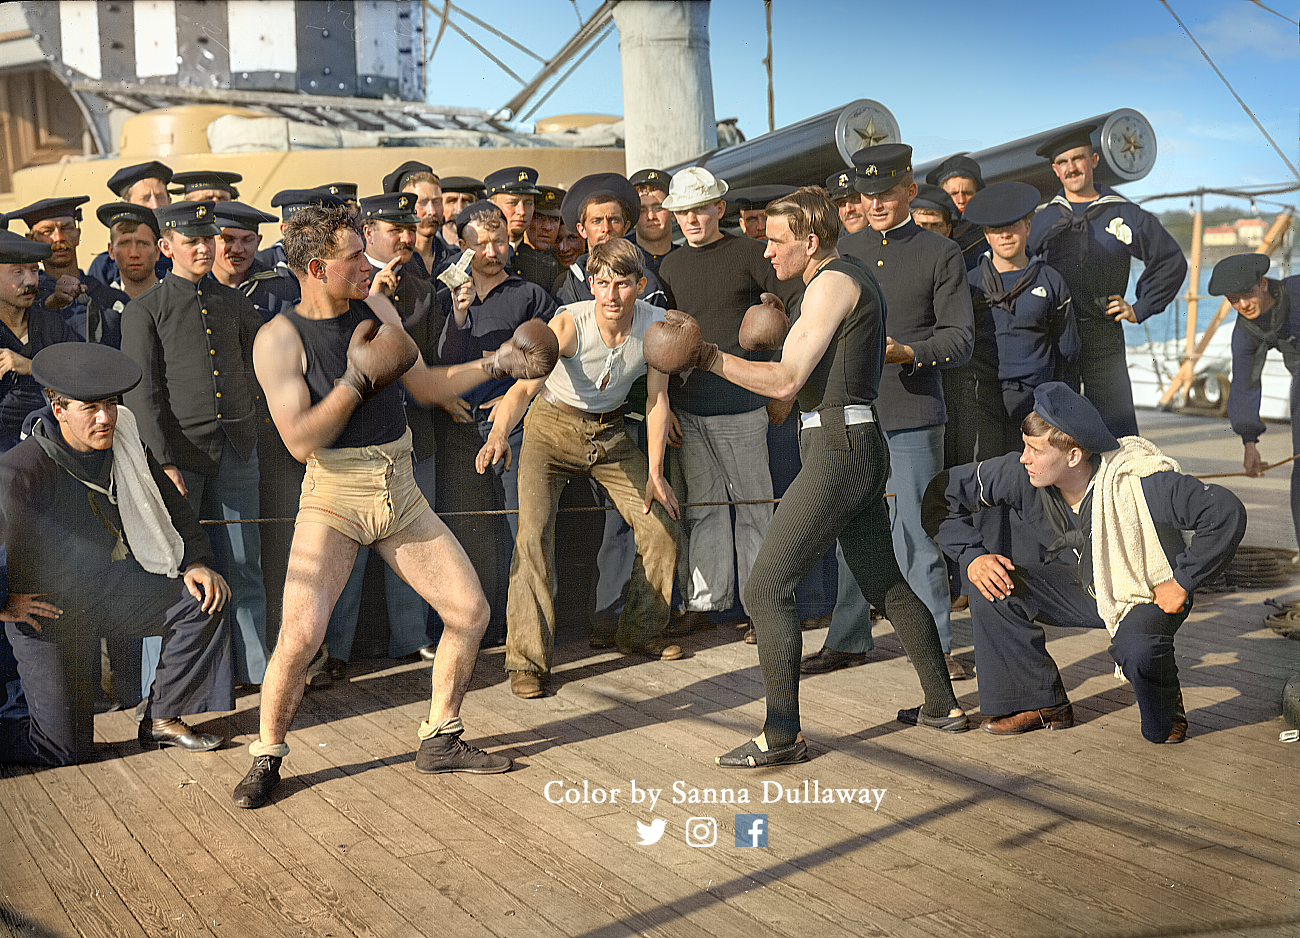 Historic Photos Color - historical pictures colored - Color by